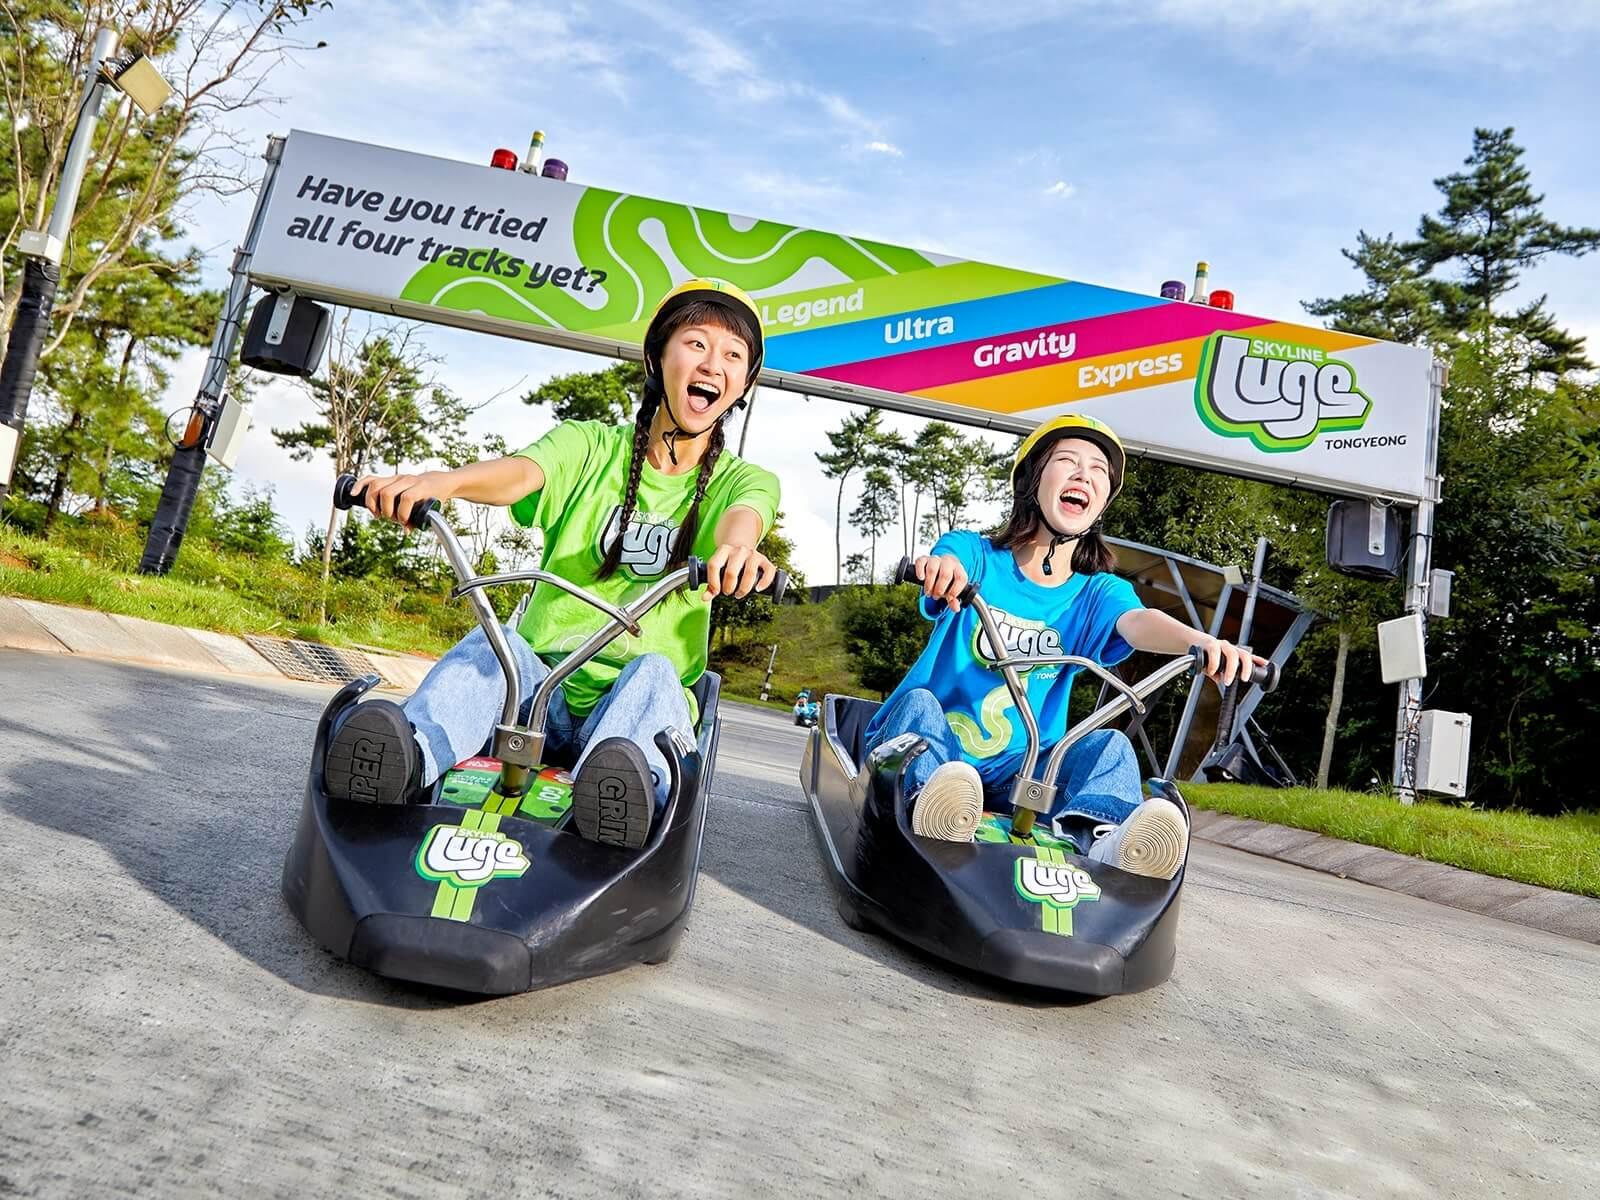 Two girls grin and scream as they ride down a steep section on the track at Skyline Luge Tongyeong.